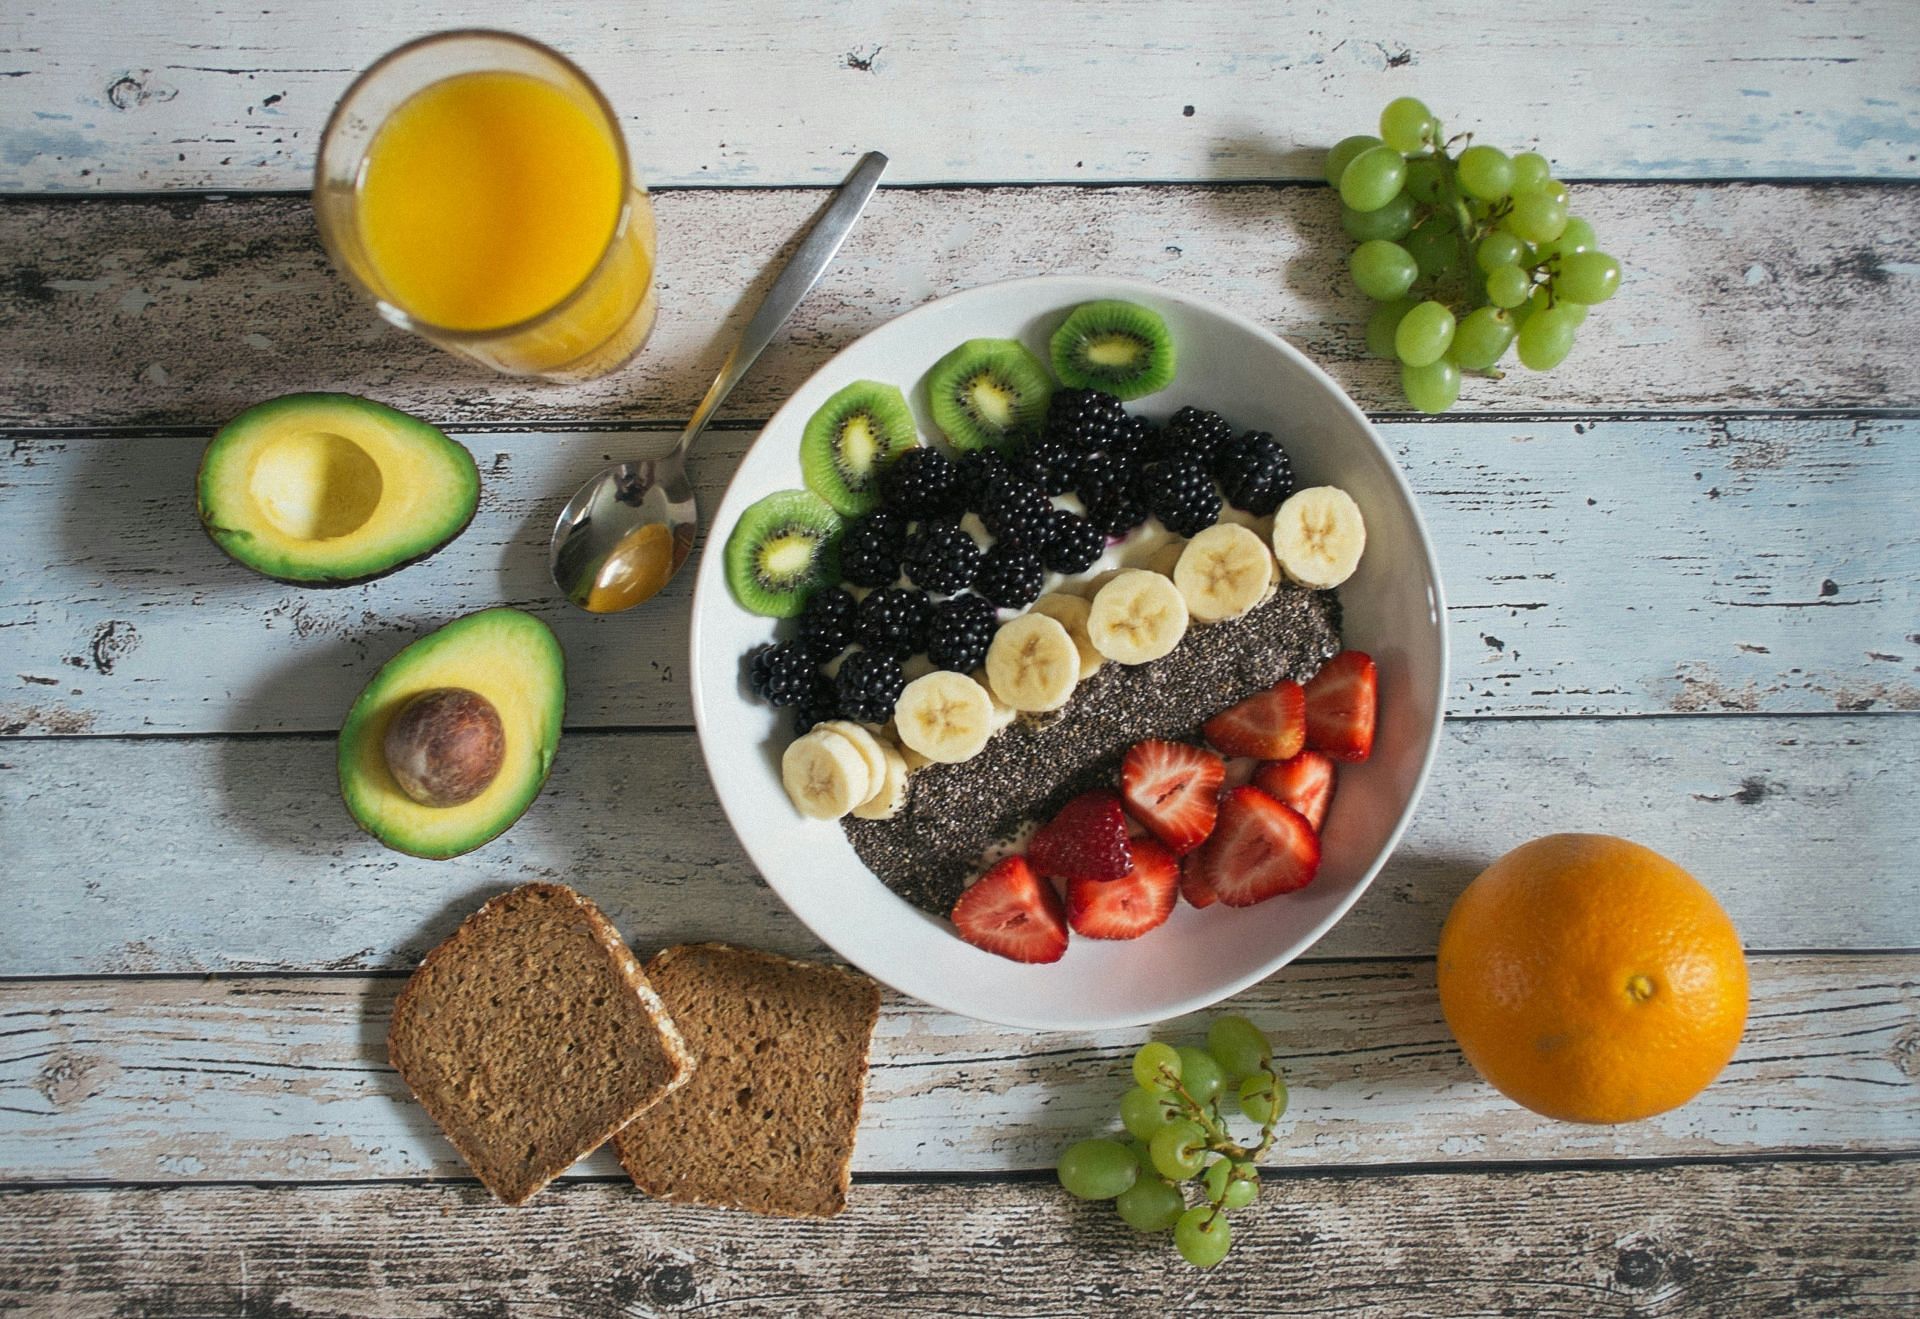 Eat healthy to look young and healthy (Image by Jannis Brandt/Unsplash)